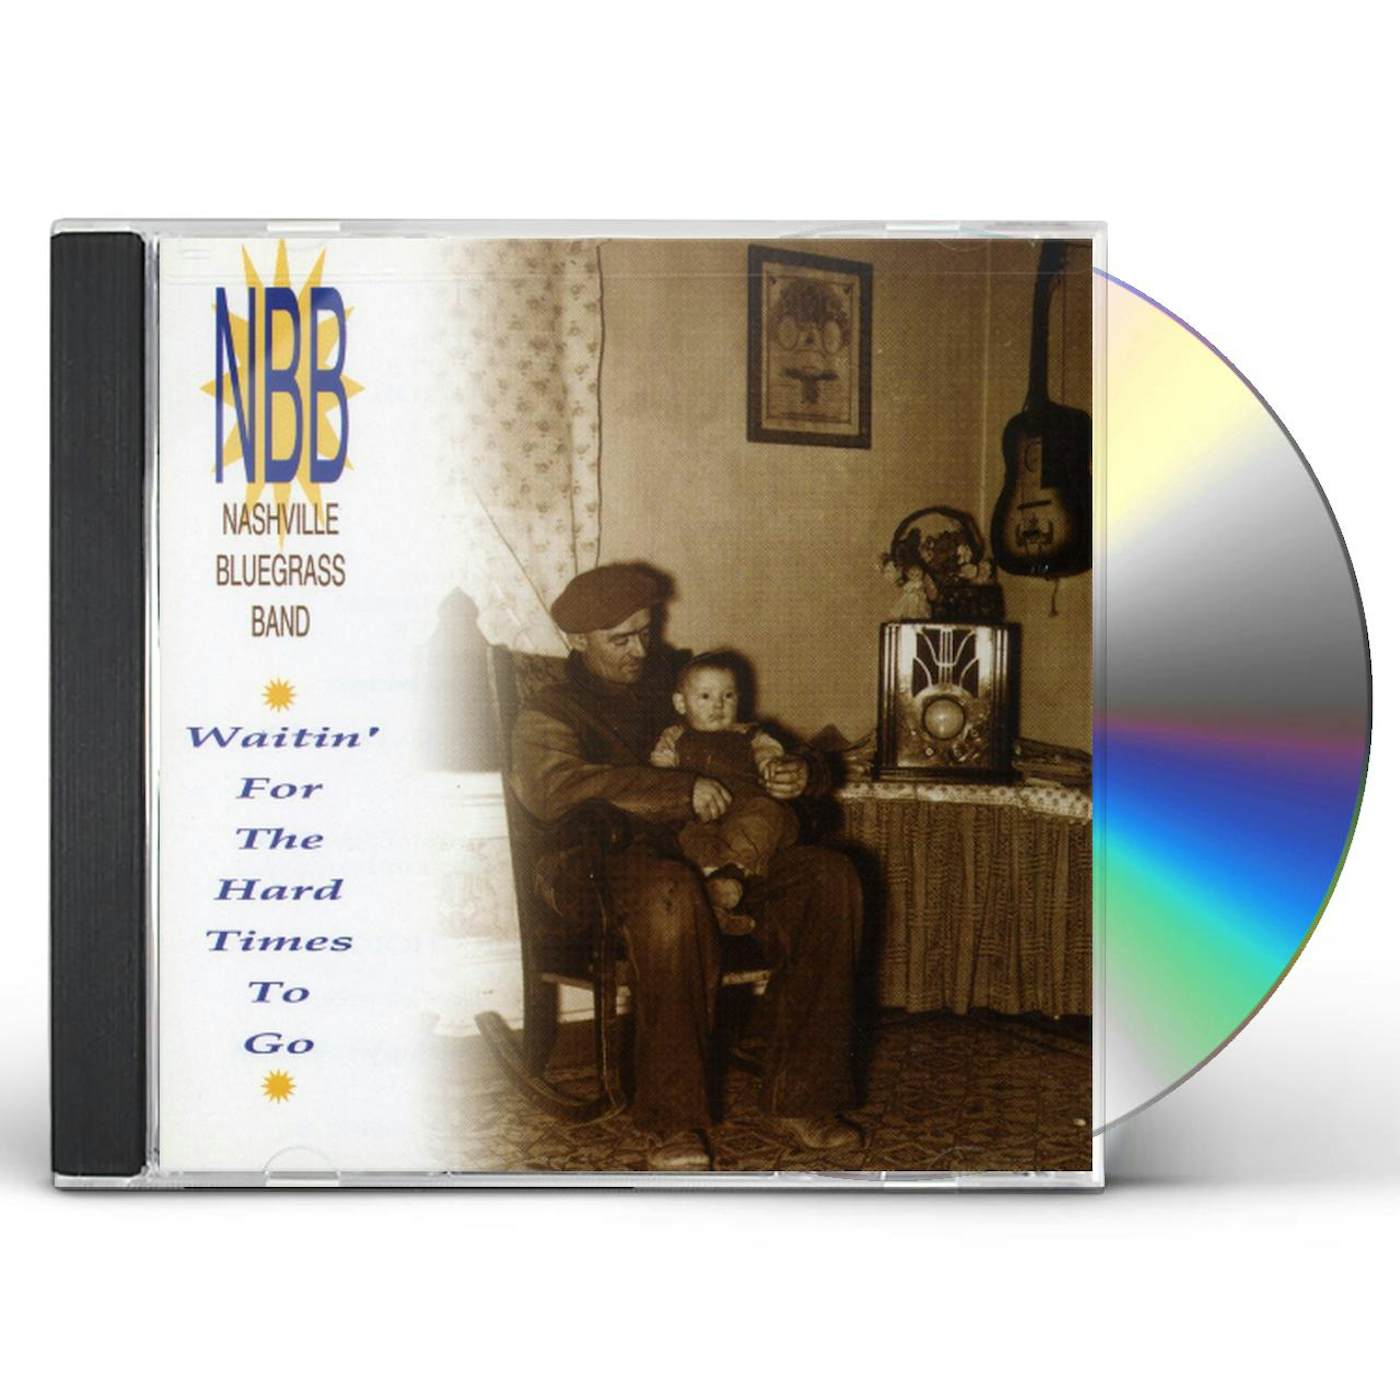 The Nashville Bluegrass Band WAITIN' FOR THE HARD TIMES TO GO CD